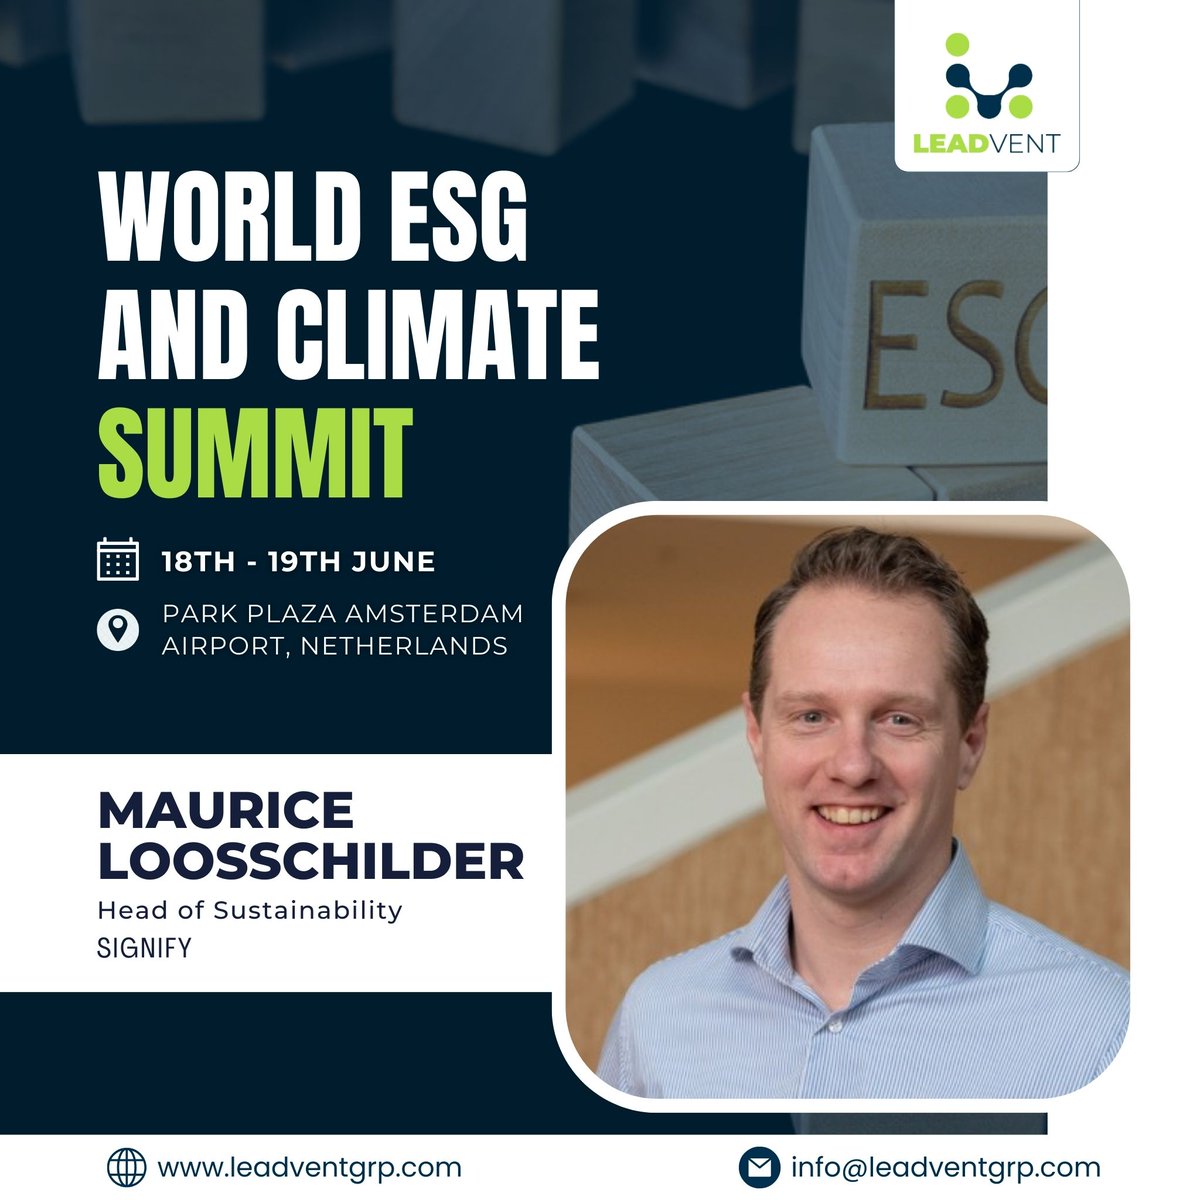 Excited to introduce Maurice Loosschilder. He is the Head of Sustainability at Signify.

Obtain a pass - bit.ly/3QaaYU7

#sustainability #ESGconcerns #netzero #Renewableenergy #Greenfinance #Greenpolicies #Sustainablefuture #Innovation #Climatesolutions #Socialimpact